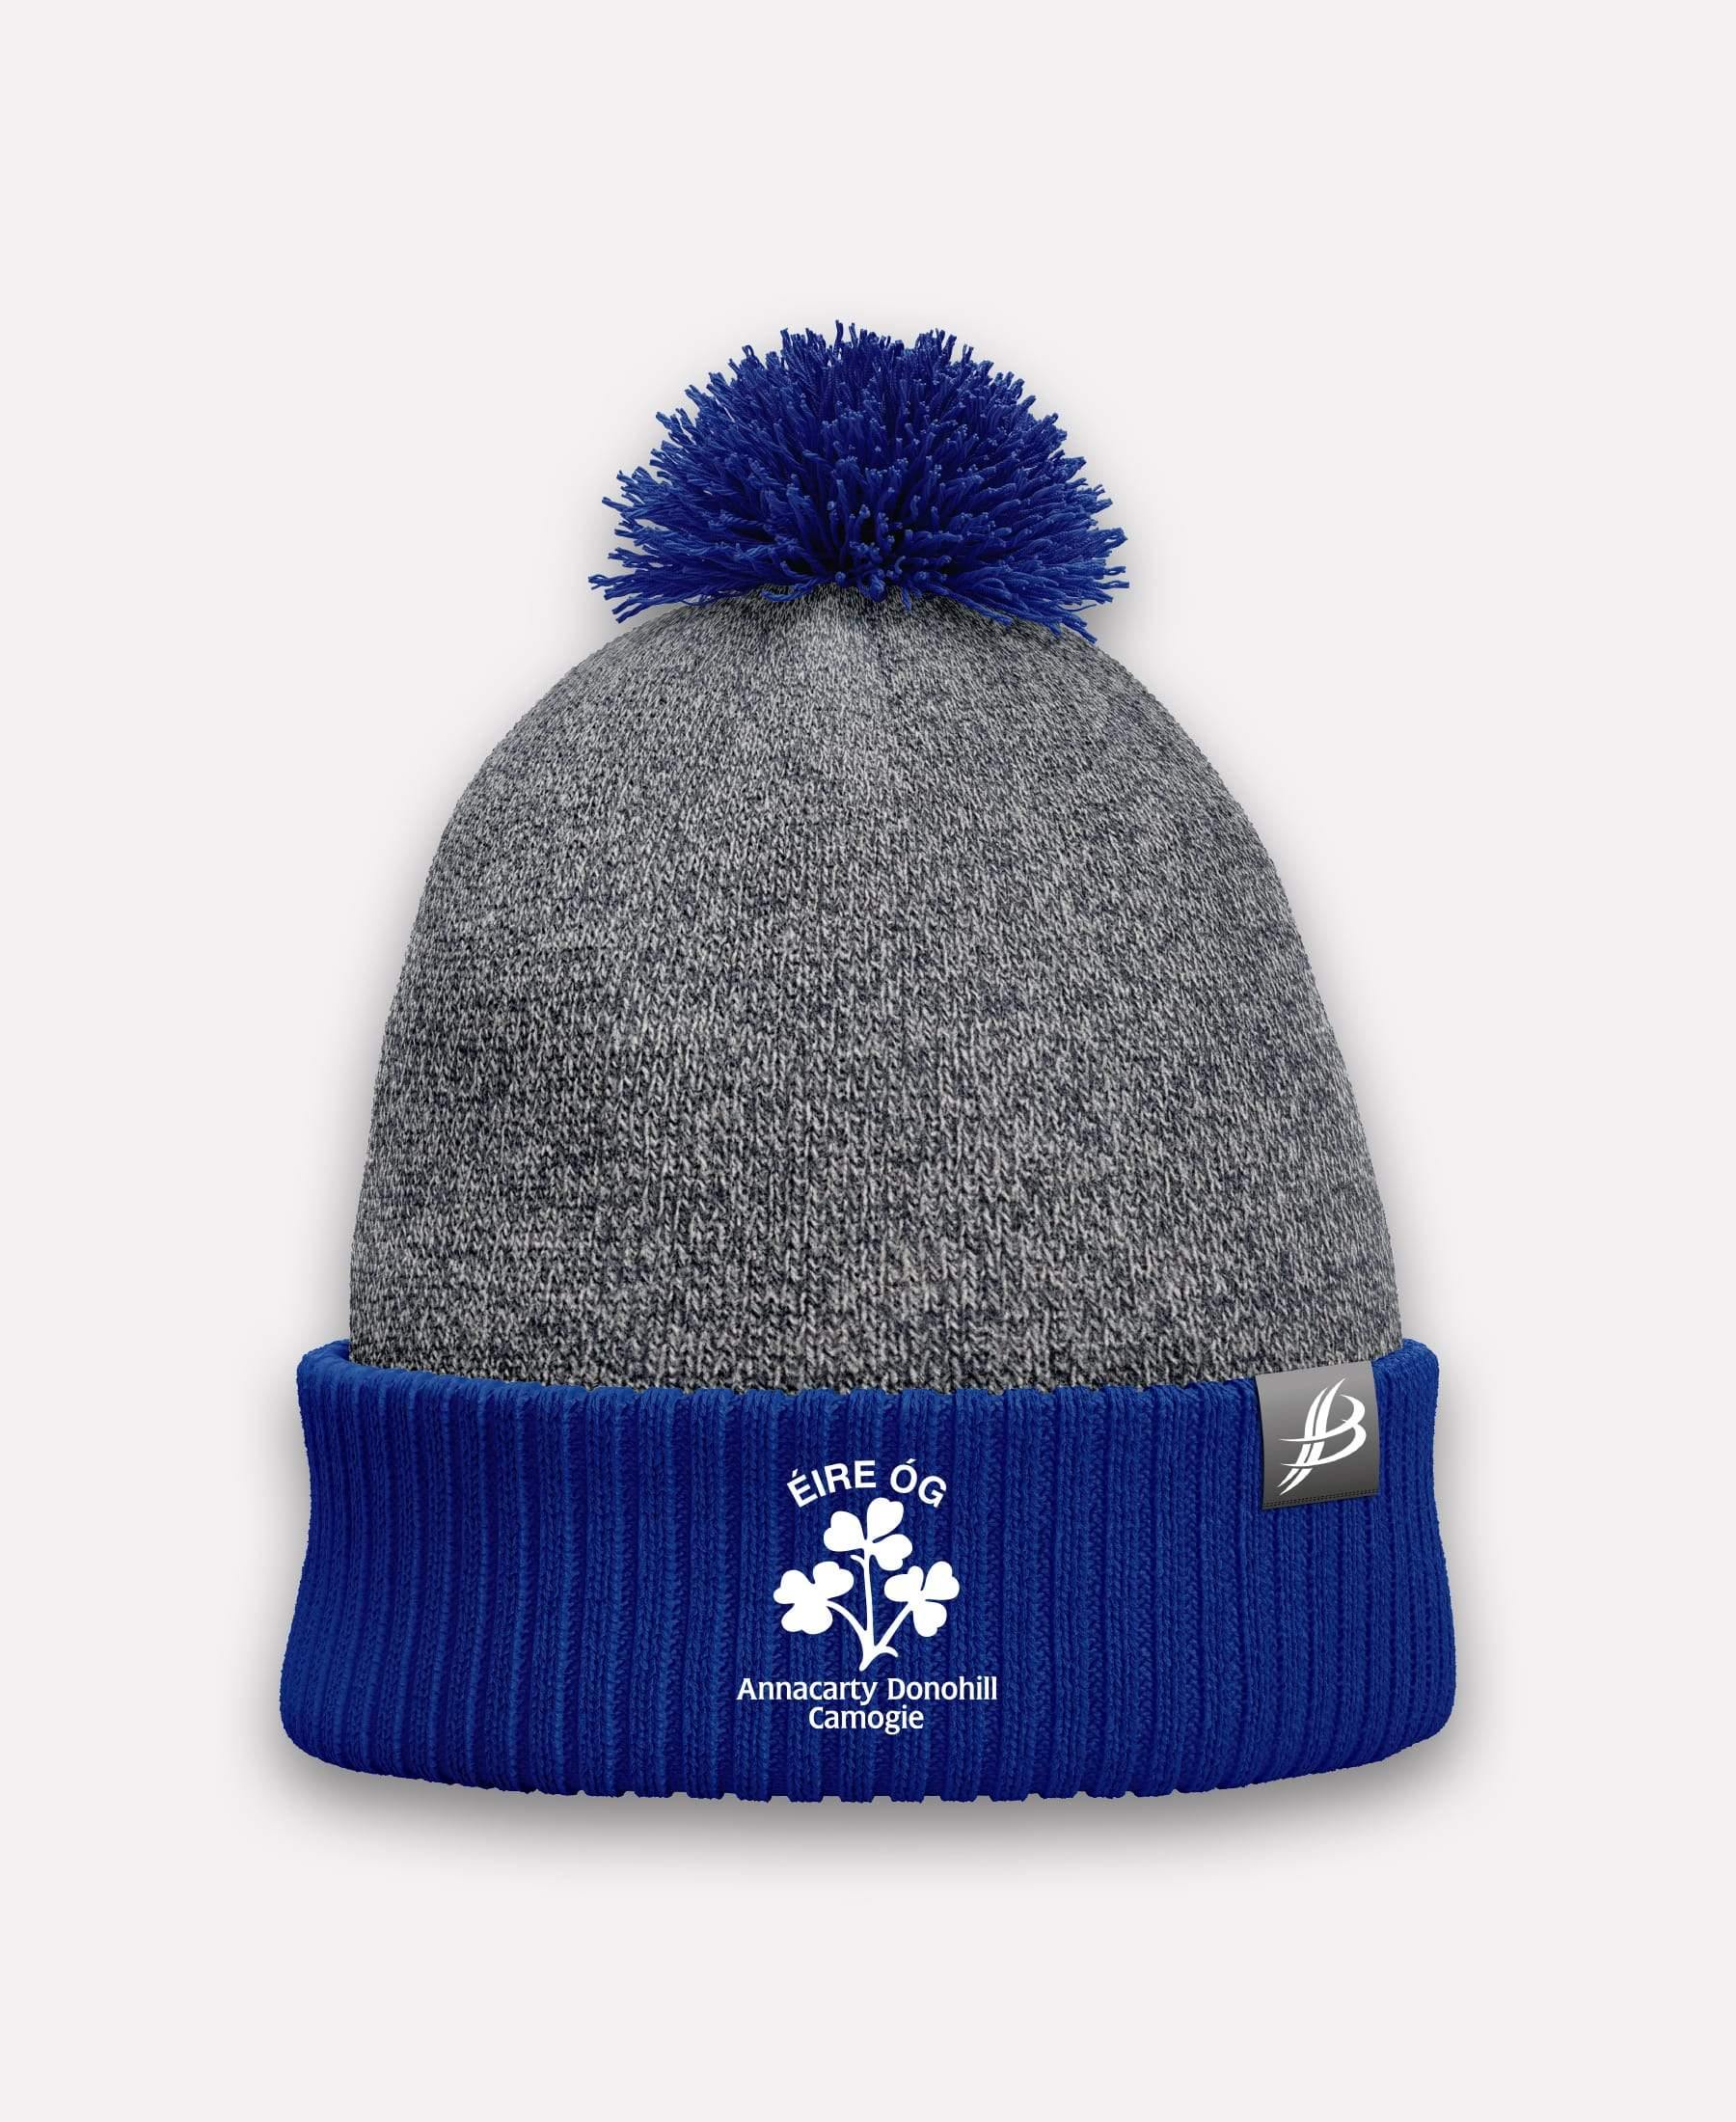 Eire Og Annacarty Donohill Camogie Storm Bobble Hat - Bourke Sports Limited